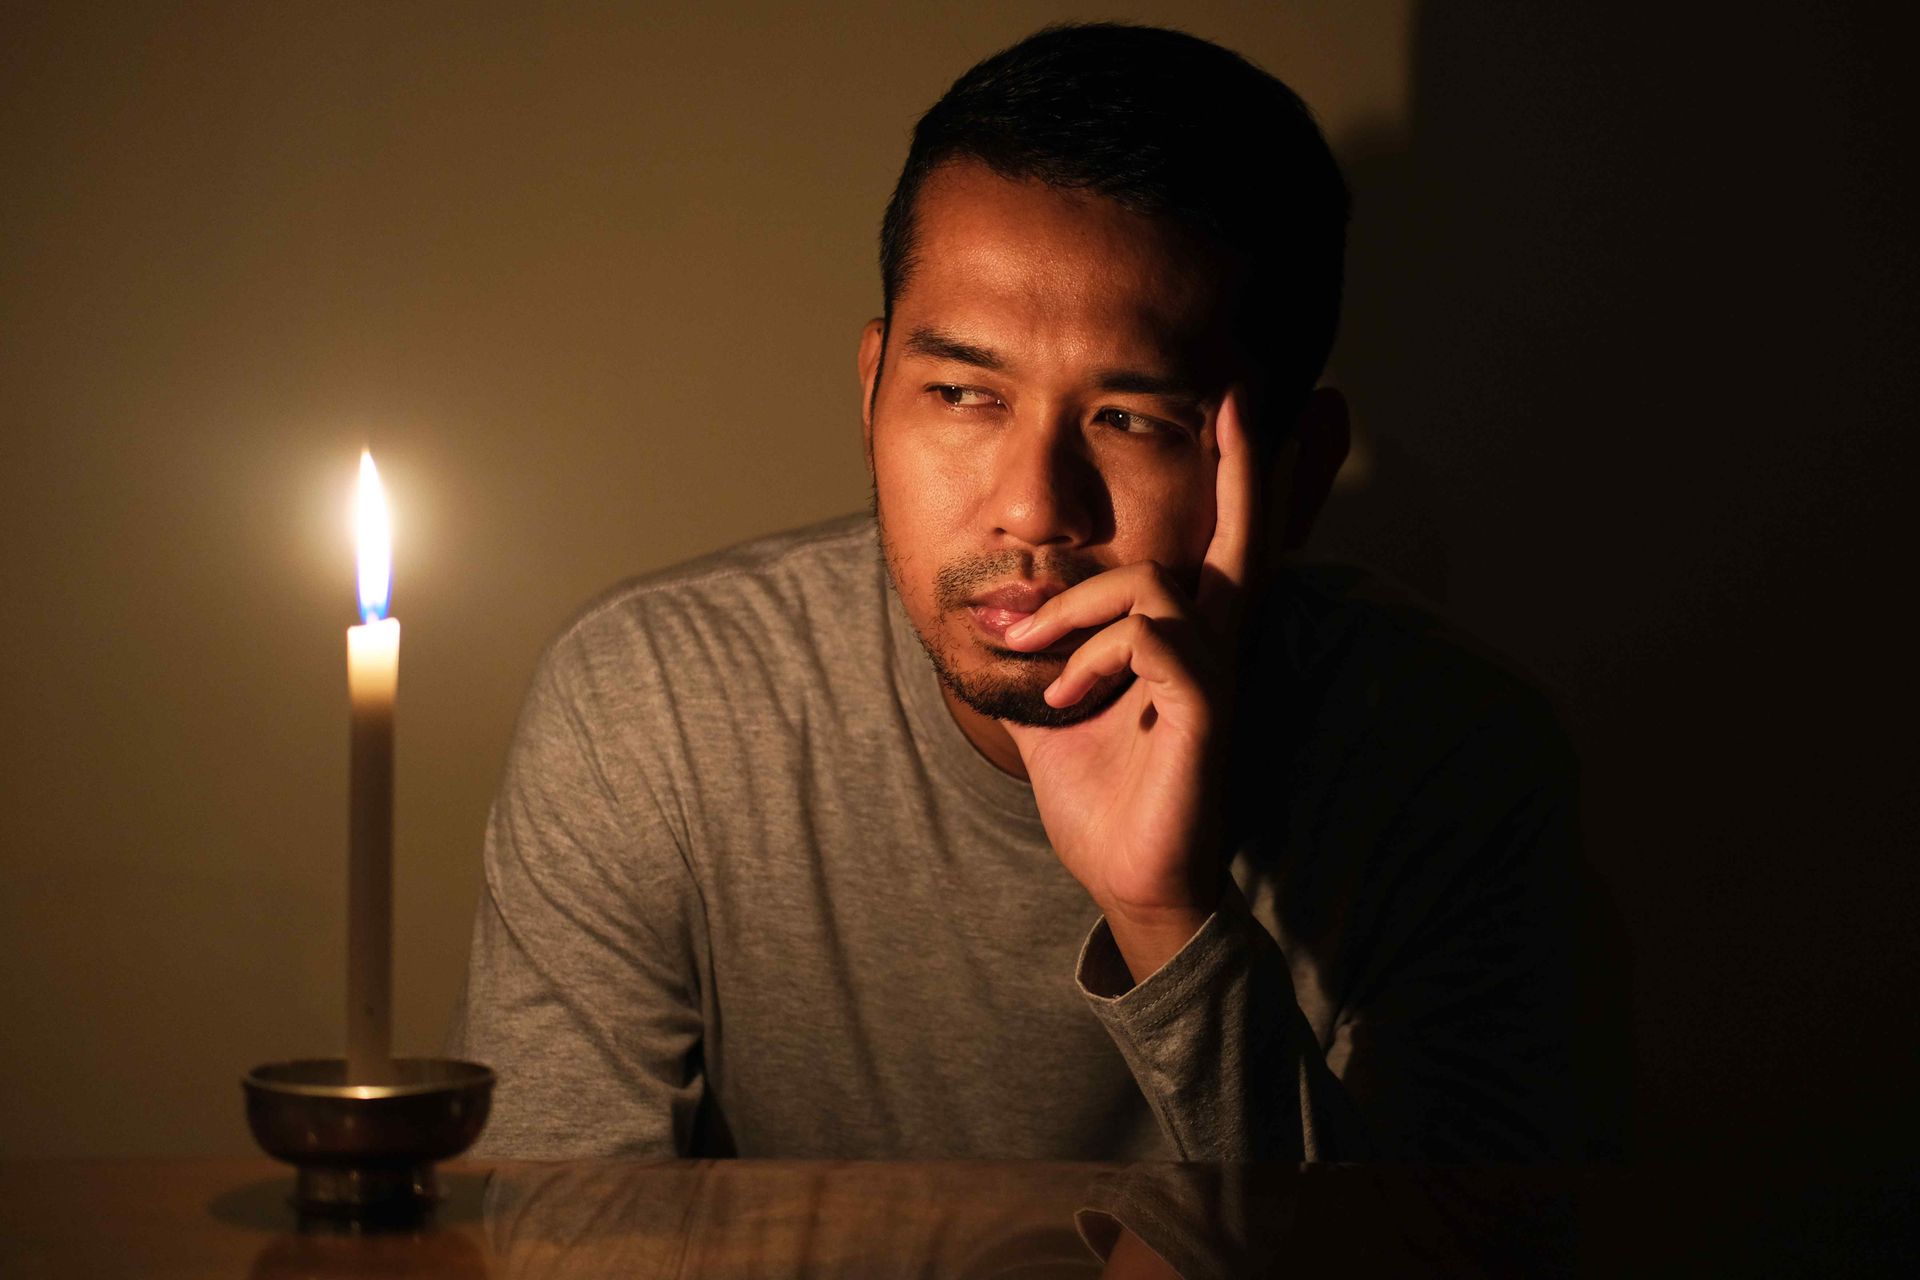 man sitting in the dark staring at a lit candle looking troubled